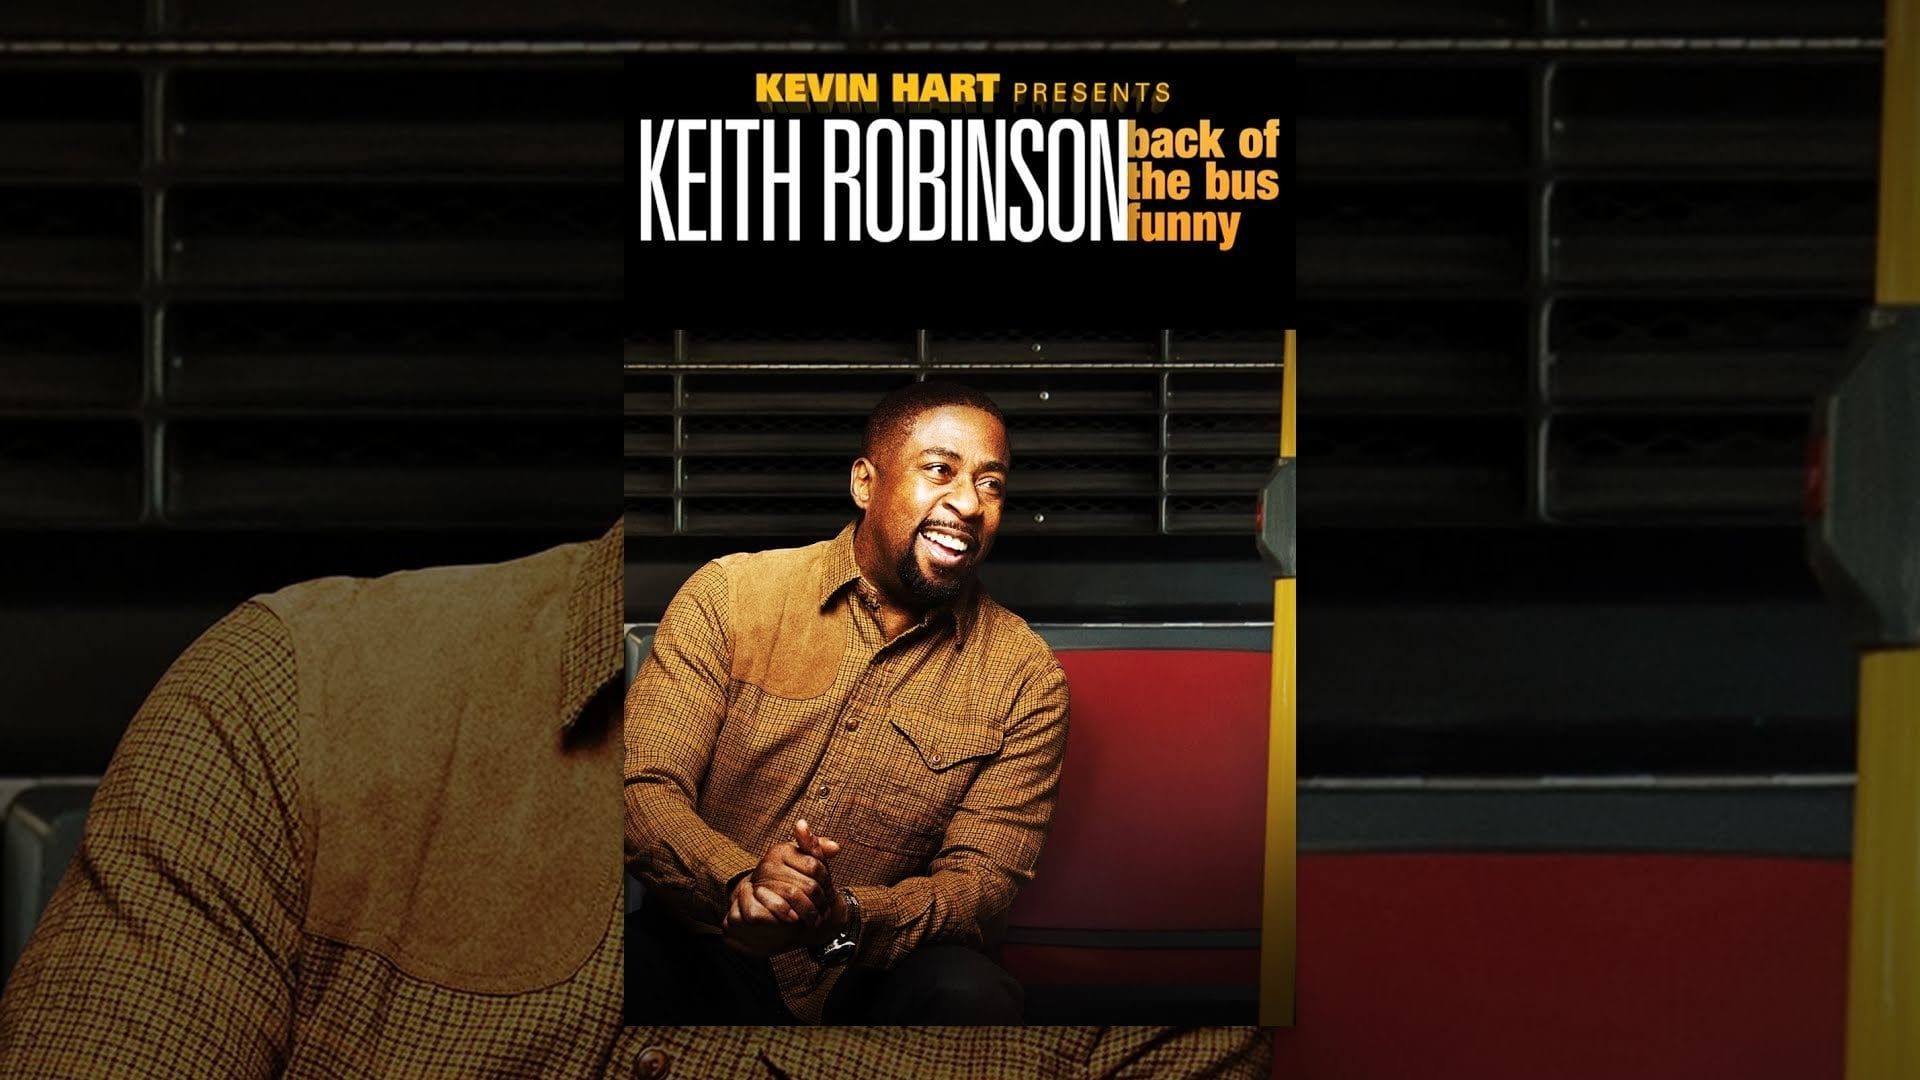 Kevin Hart Presents: Keith Robinson - Back of the Bus Funny background